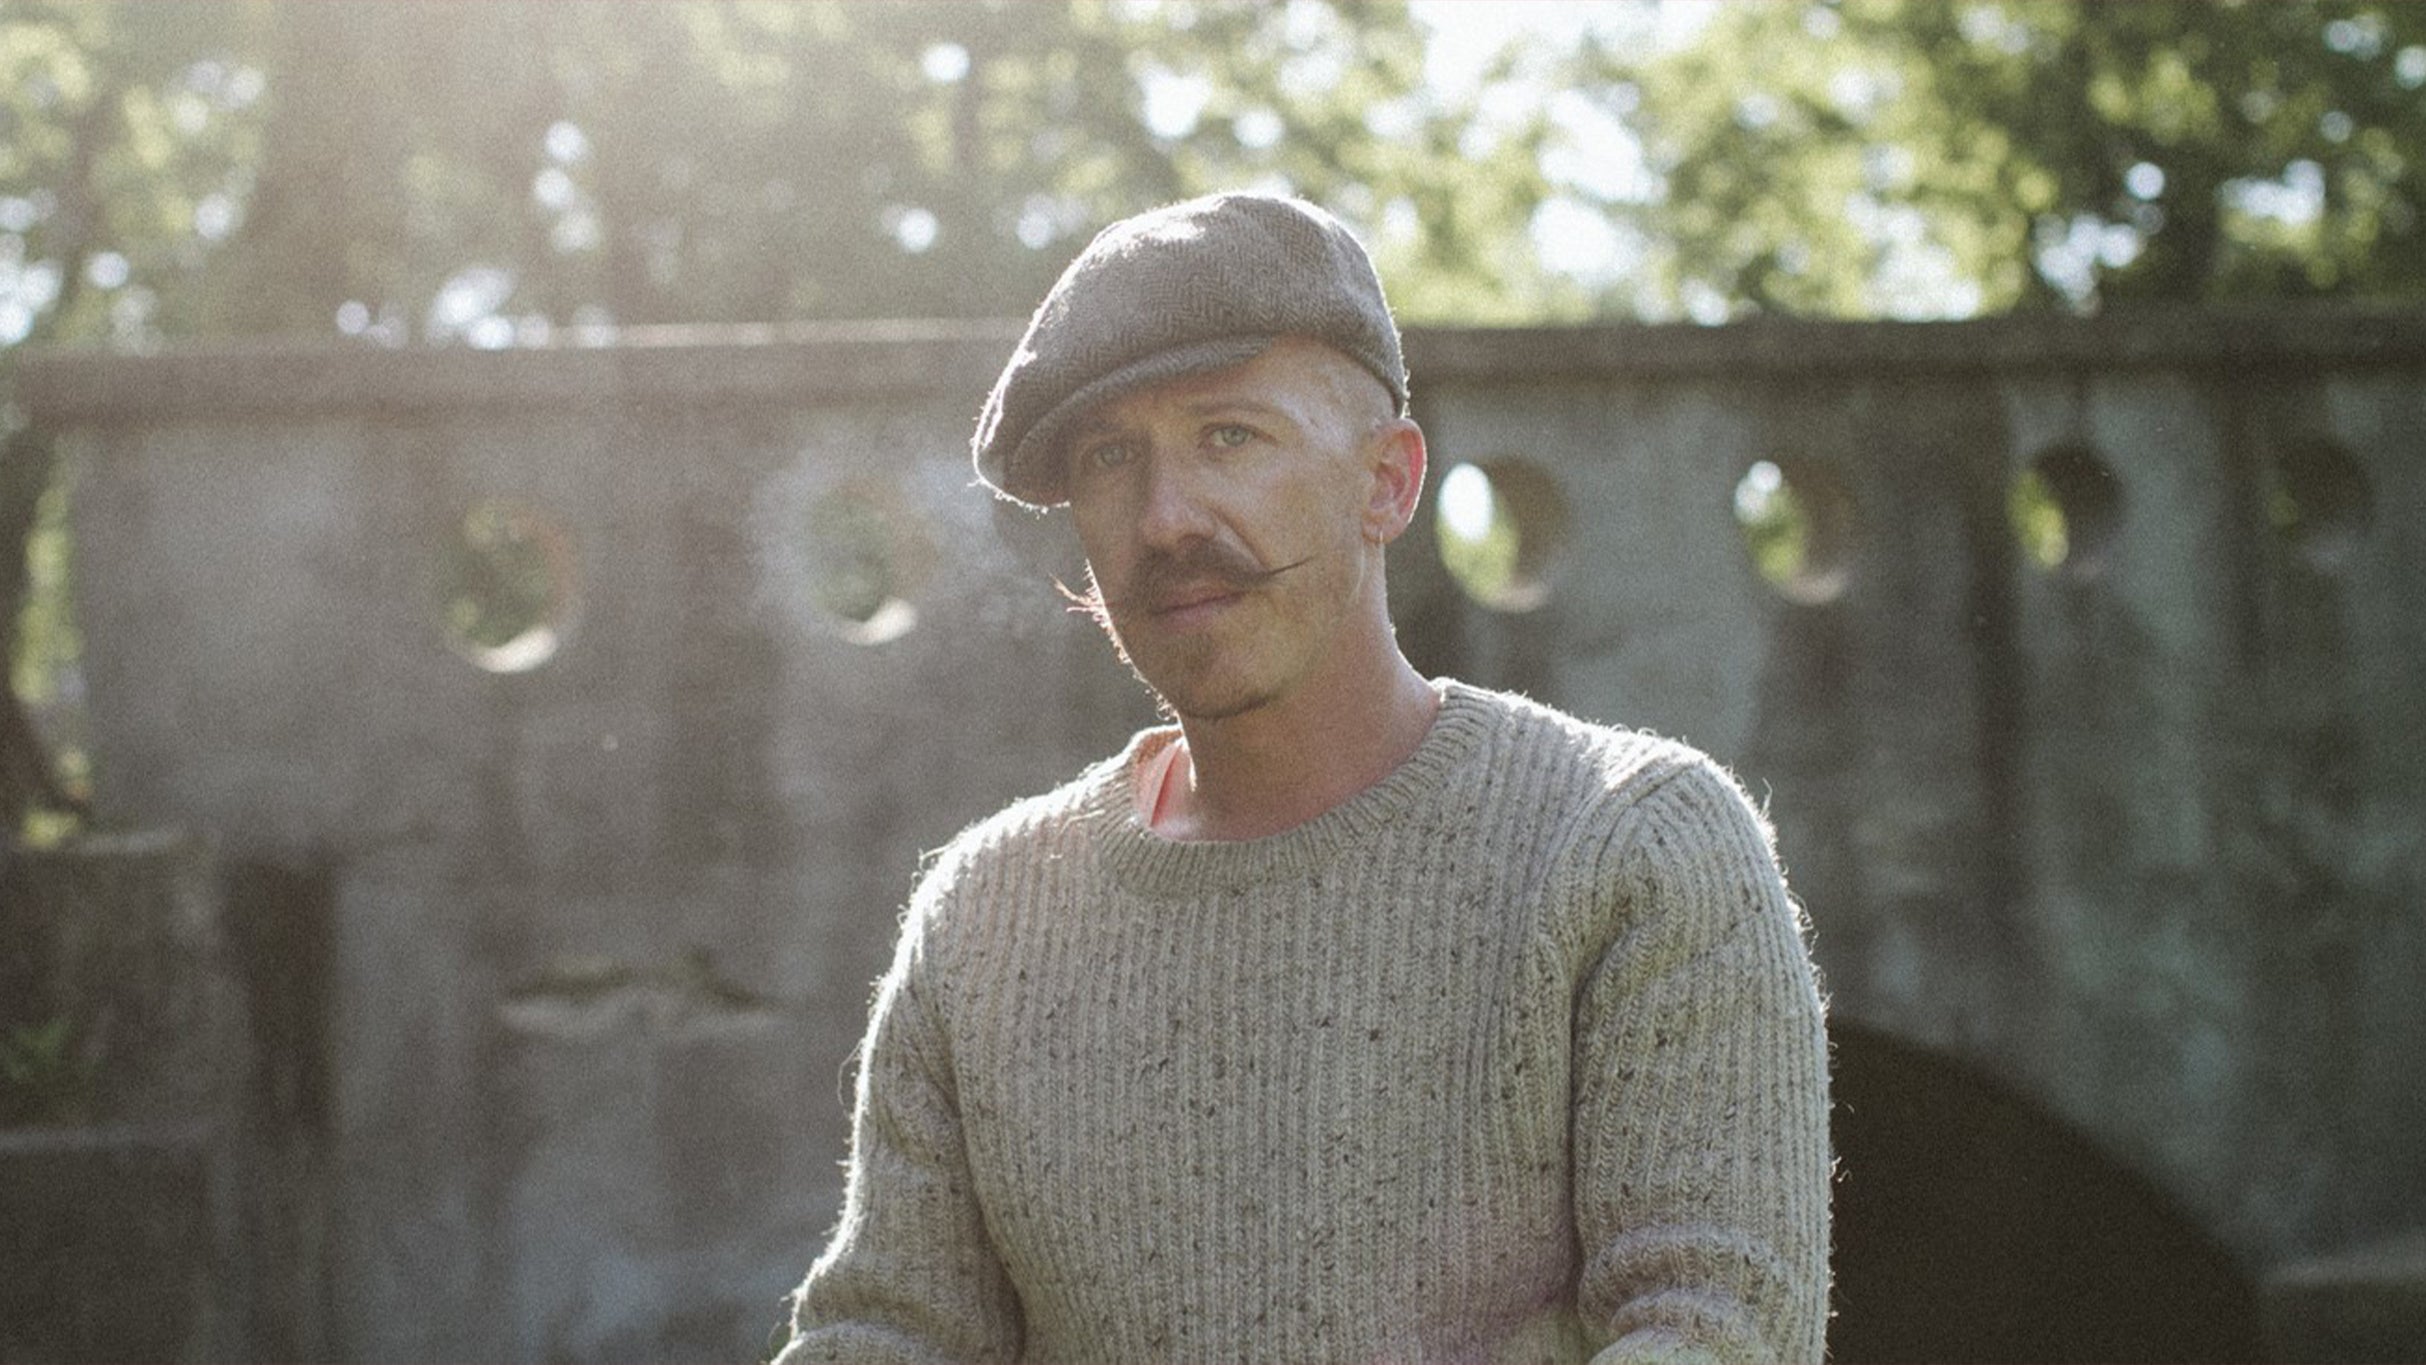 Image used with permission from Ticketmaster | Foy Vance - Regarding the Joy of Nothing Tour tickets